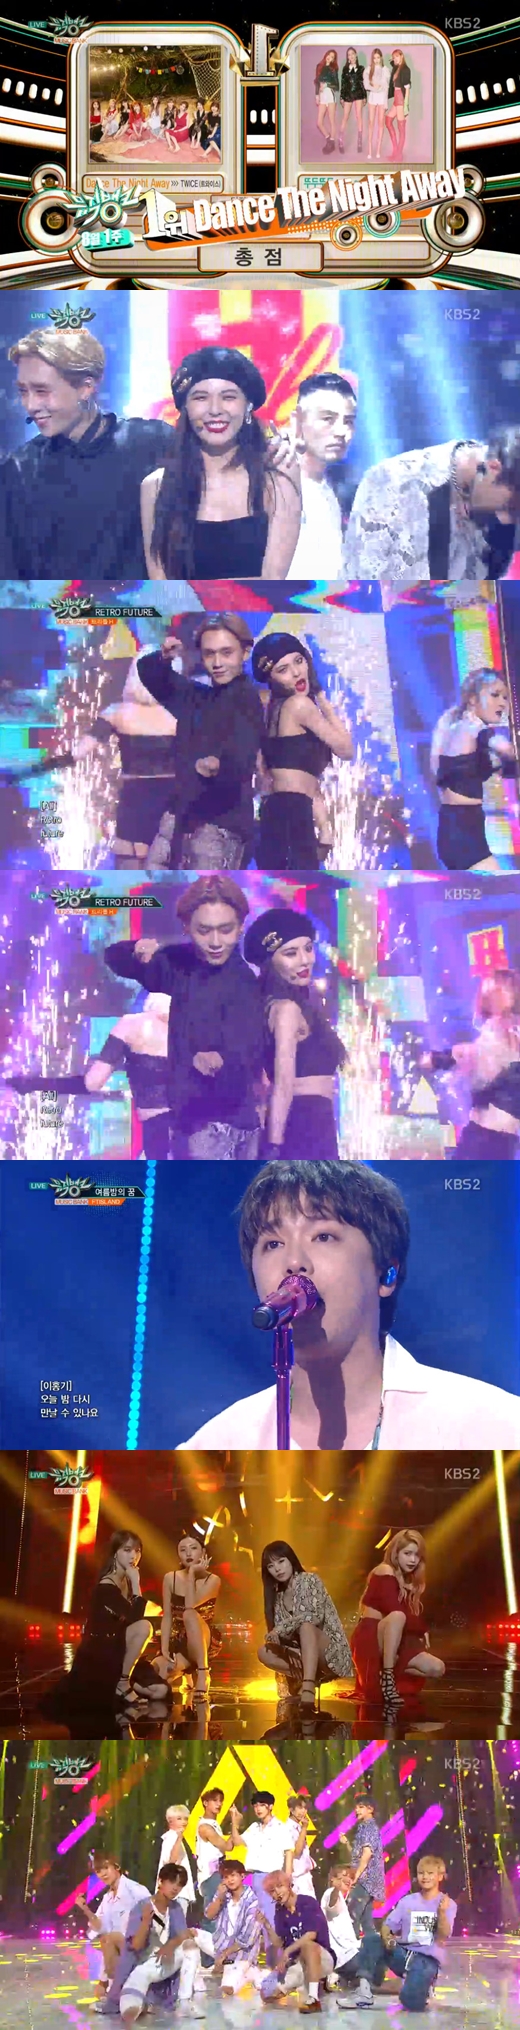 Girl group TWICE picked up another trophy: Hybrid group TripleH Hyona, 26, and EDawn, 24, took their first stage after admitting their devotion.TWICE won first place on KBS 2TV Music Bank broadcast on the 3rd, defeating Black Pinks Dance The Night Away which was nominated together.On the other hand, Music Bank appeared on FT Island, IN2IT, KARD, Seventeen, Kyungri, Golden Child, Gugudan Seminar, Neon Punch, La Boom, Mama Moo, Mytin, Momoland, Mikyo, 100%, Seraday, girlfriend, Jeong Seunun, Cheongha, Triple H and Hyorin.Especially, it was the stage of Triple H Because Hyuna and EDawn reversed the position of their agency the day before they denied the romance and acknowledged their devotion on this day.The two have developed a friendship as a colleague of their agency and have developed into a lover relationship since May 2016.Another member of Triple H, Hui, was also revealed to have split from girl group (girl) child member Sujin on the day.Triple H Hyona and EDawn provocatively showed choreography with bold skinning on the Music Bank stage.